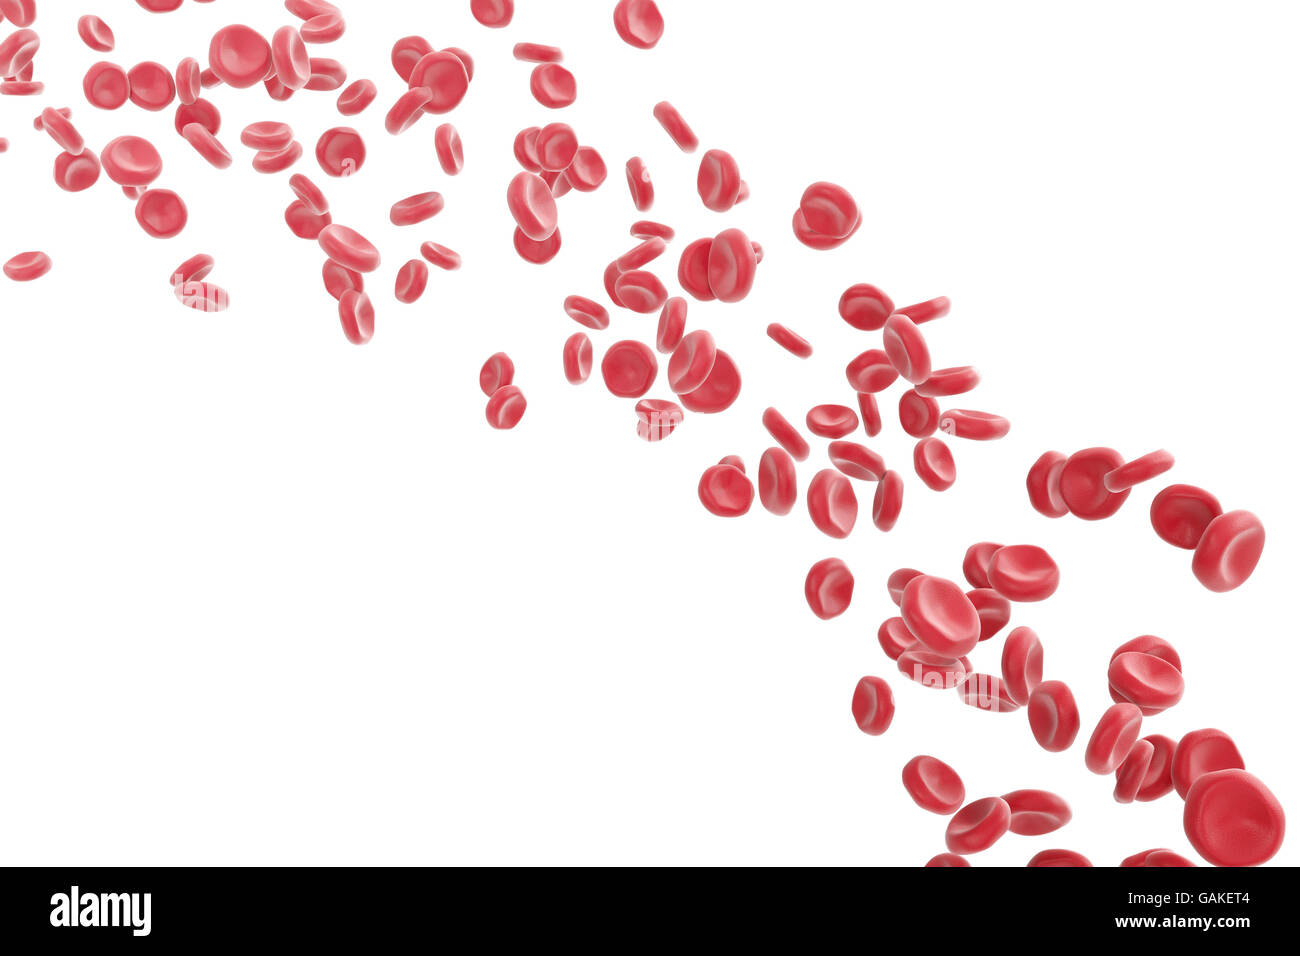 Red blood cells isolated on white. 3d illustration high quality Stock Photo